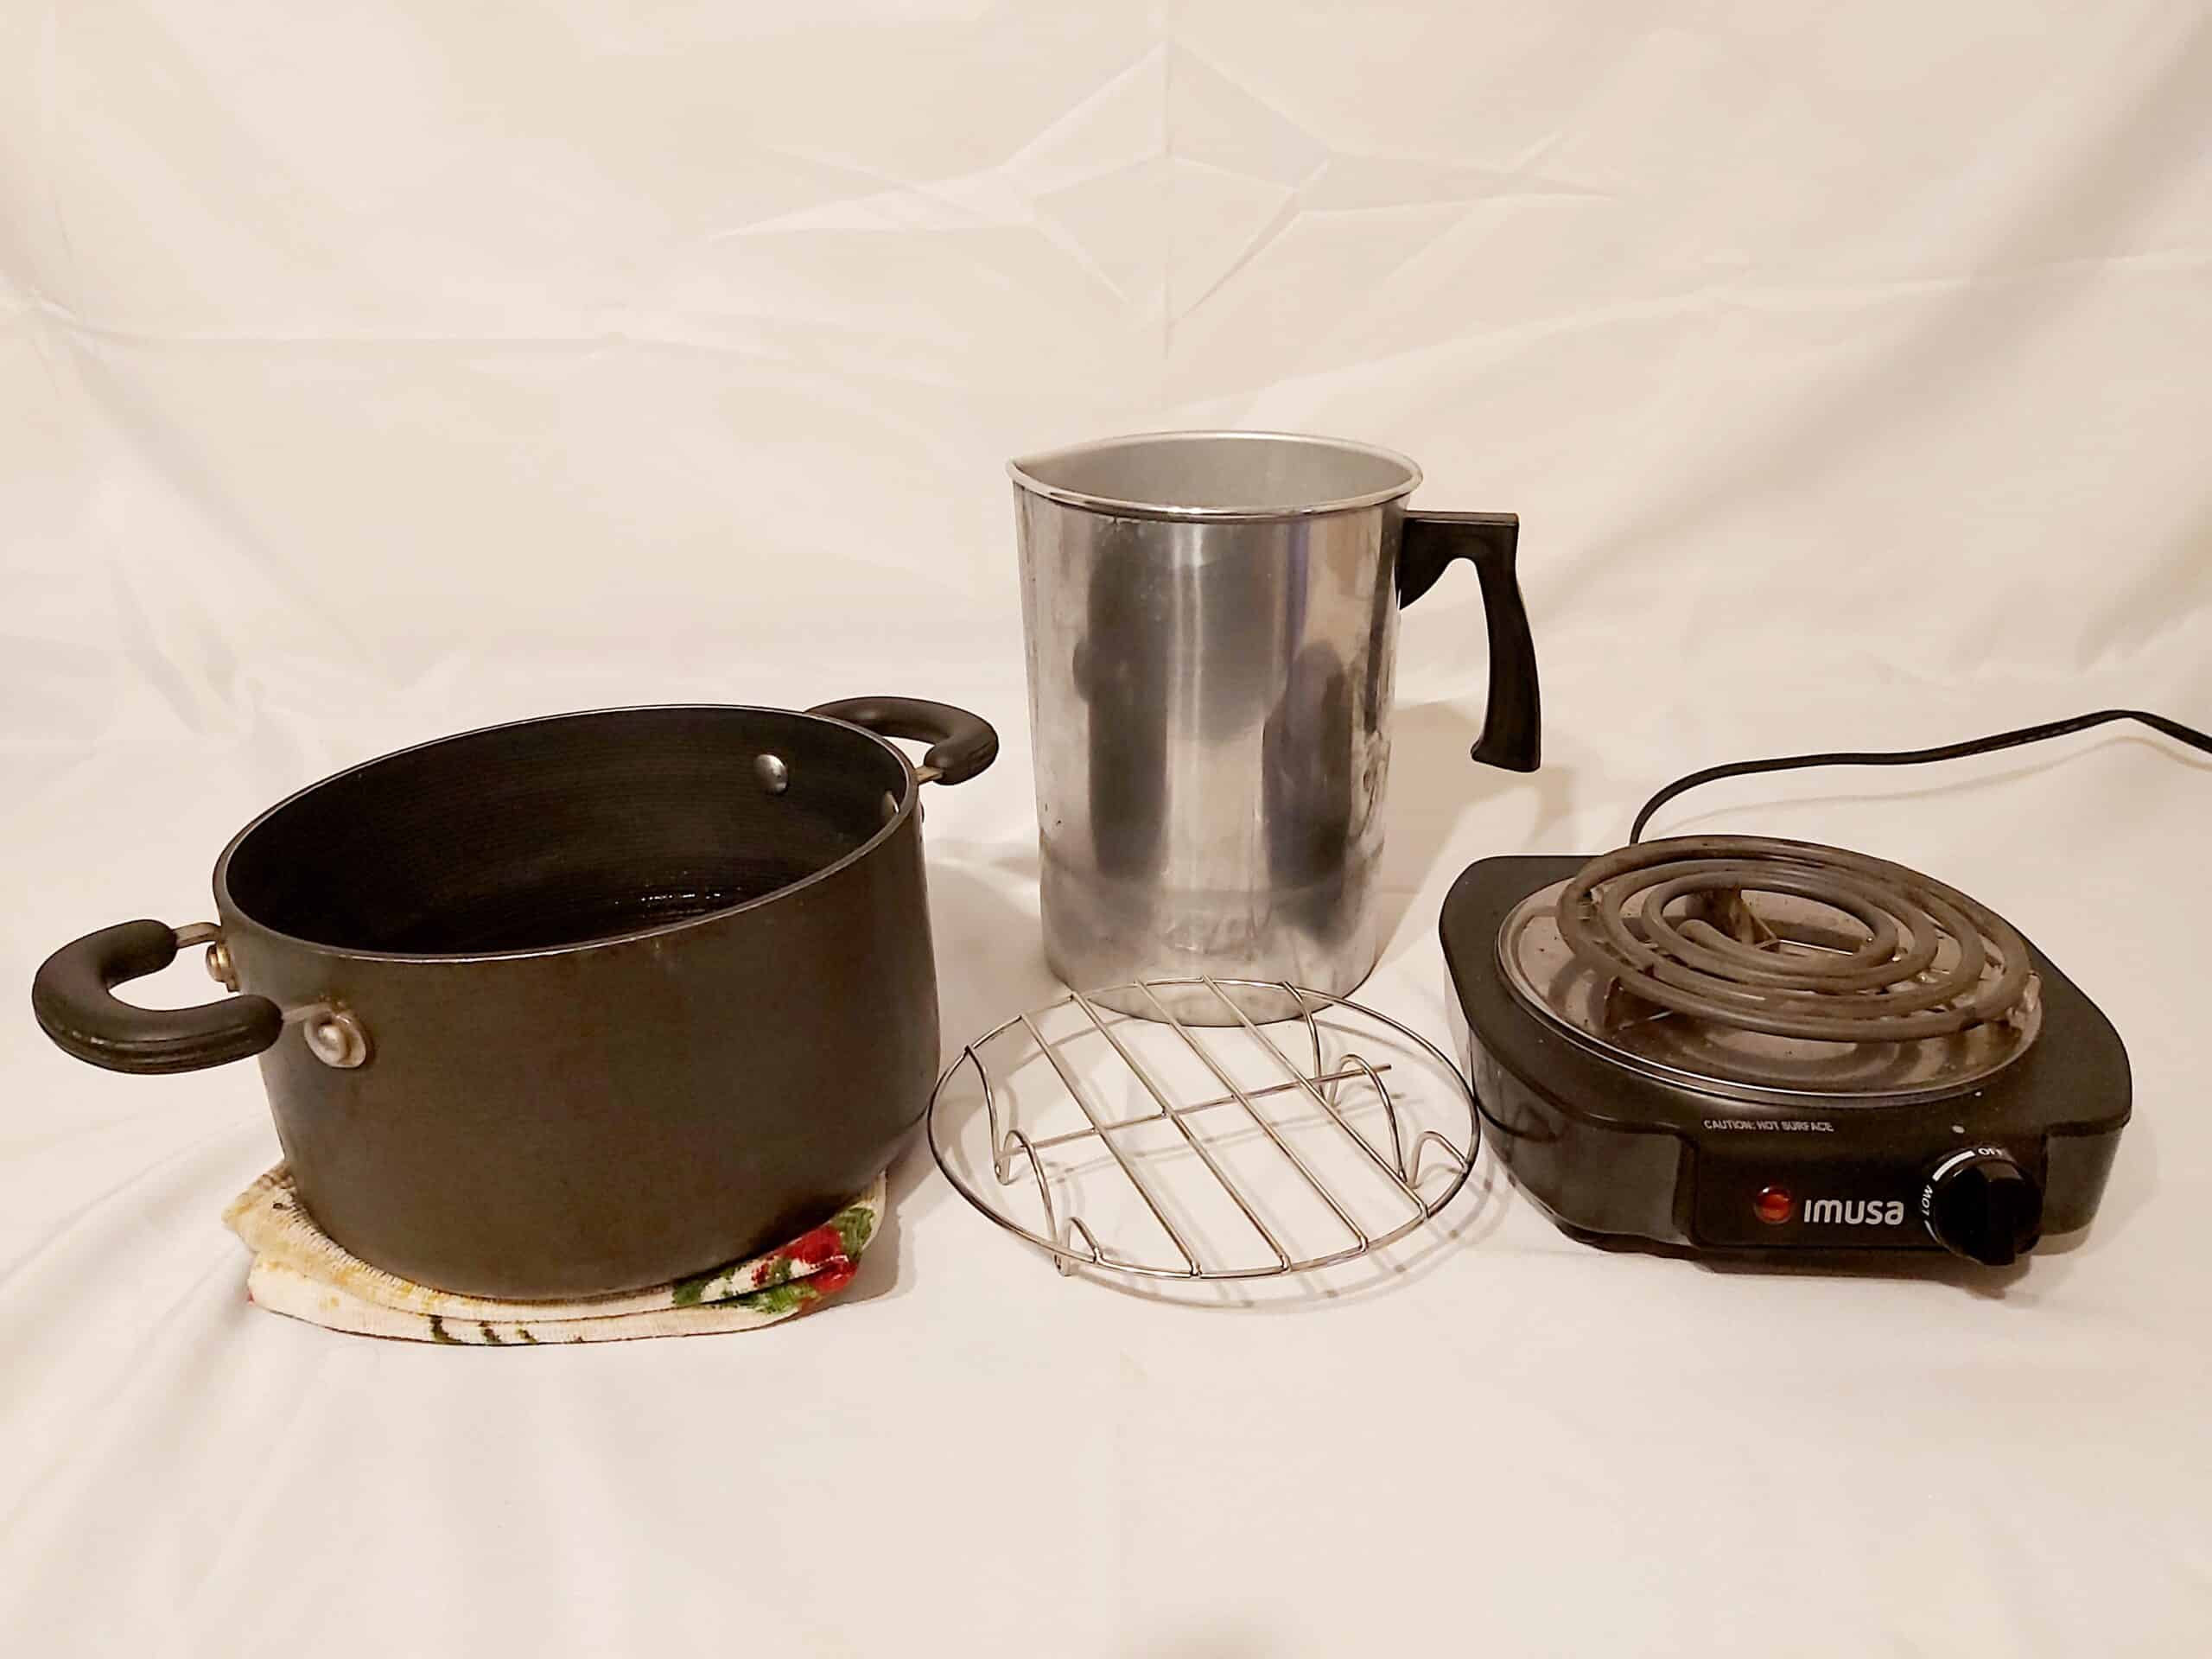 Hot Plate for Candle Making, Portable Electric Stove Melting